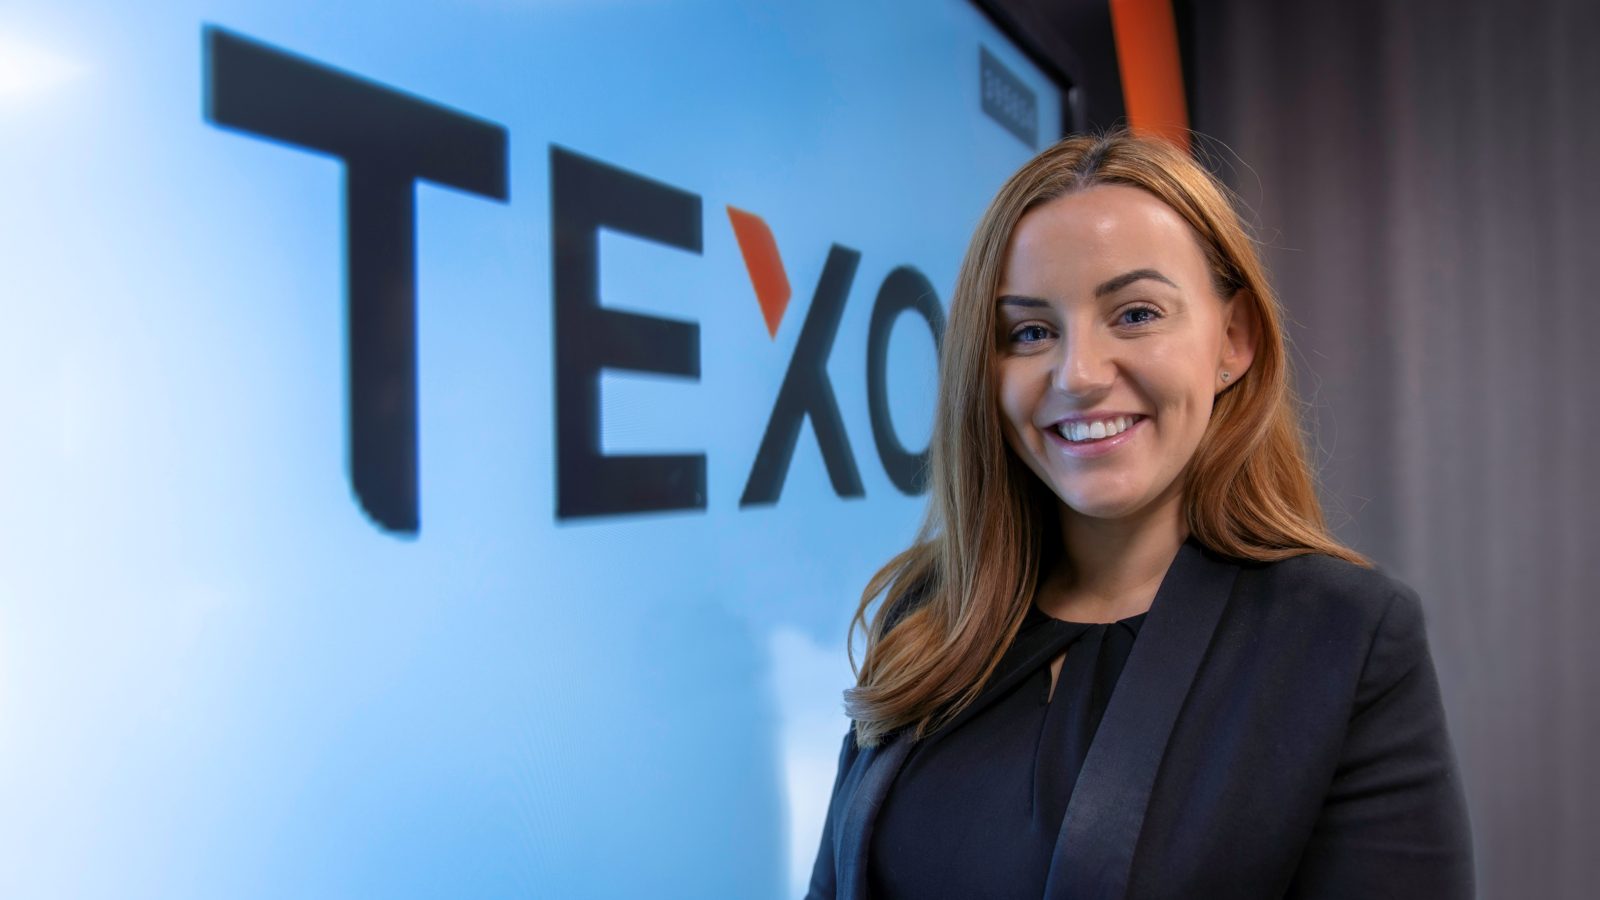 TEXO Recruitment thought piece – Growing A Quality Workforce